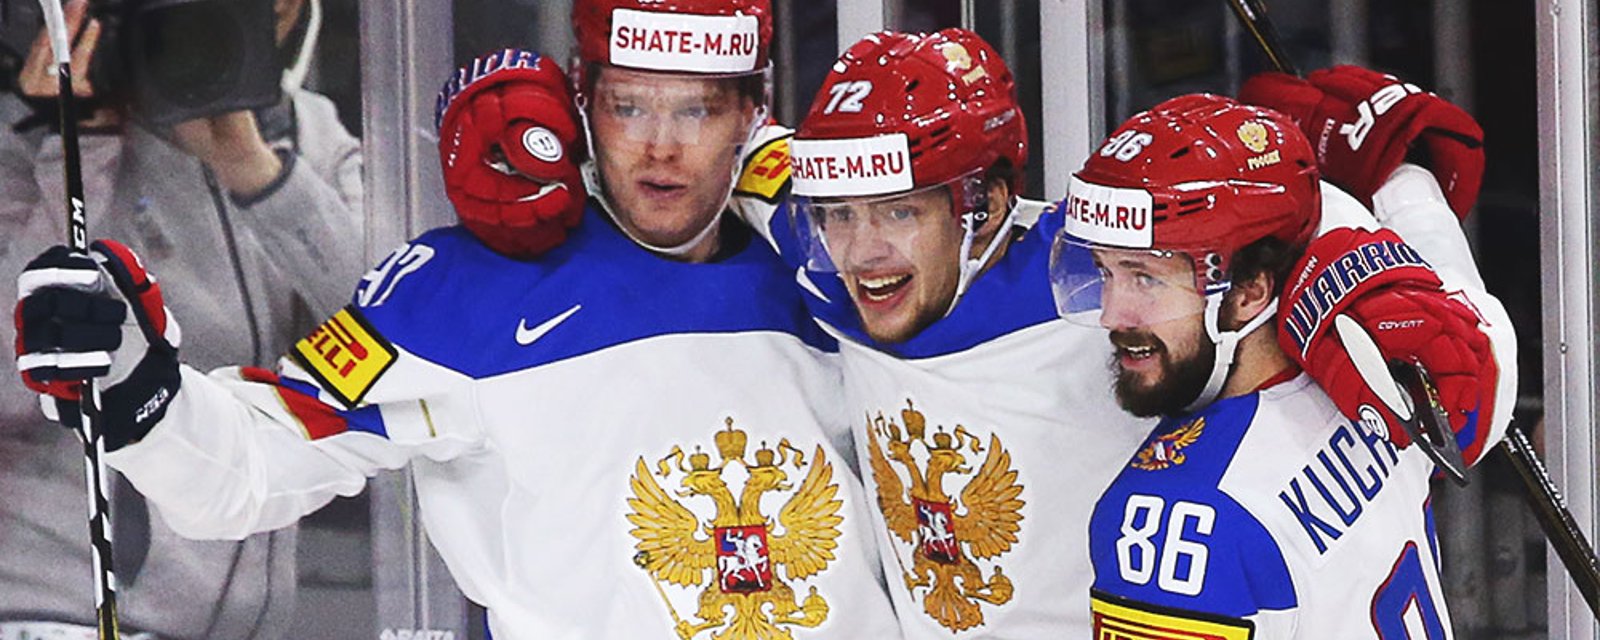 Report: NHL star offered crazy money from the KHL